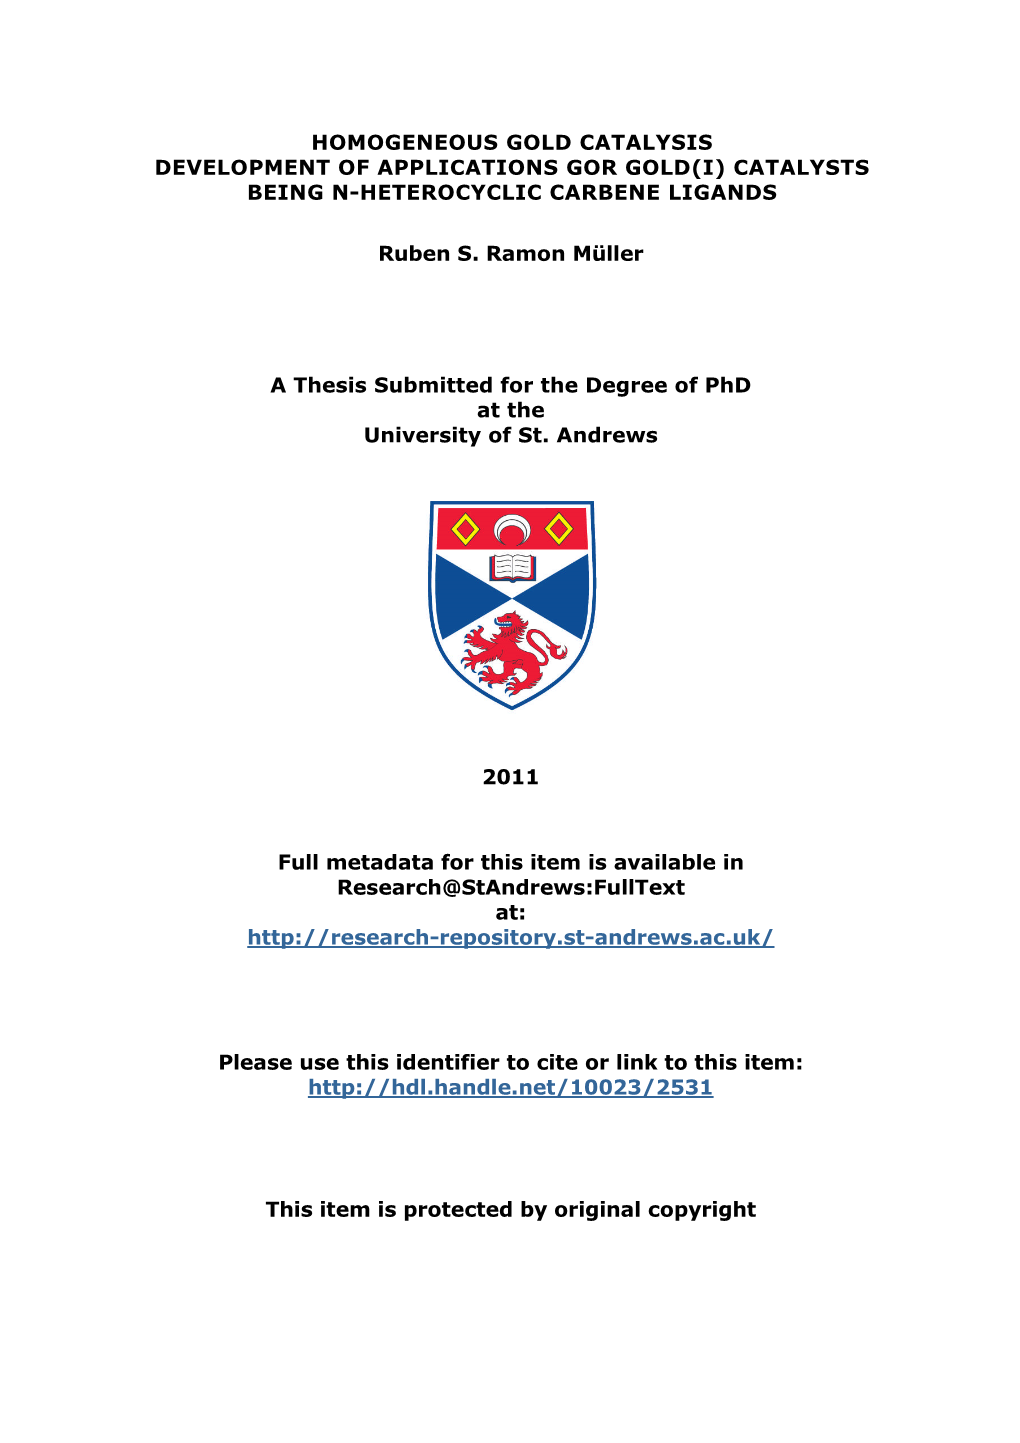 Thesis R. S. Ramon Müller